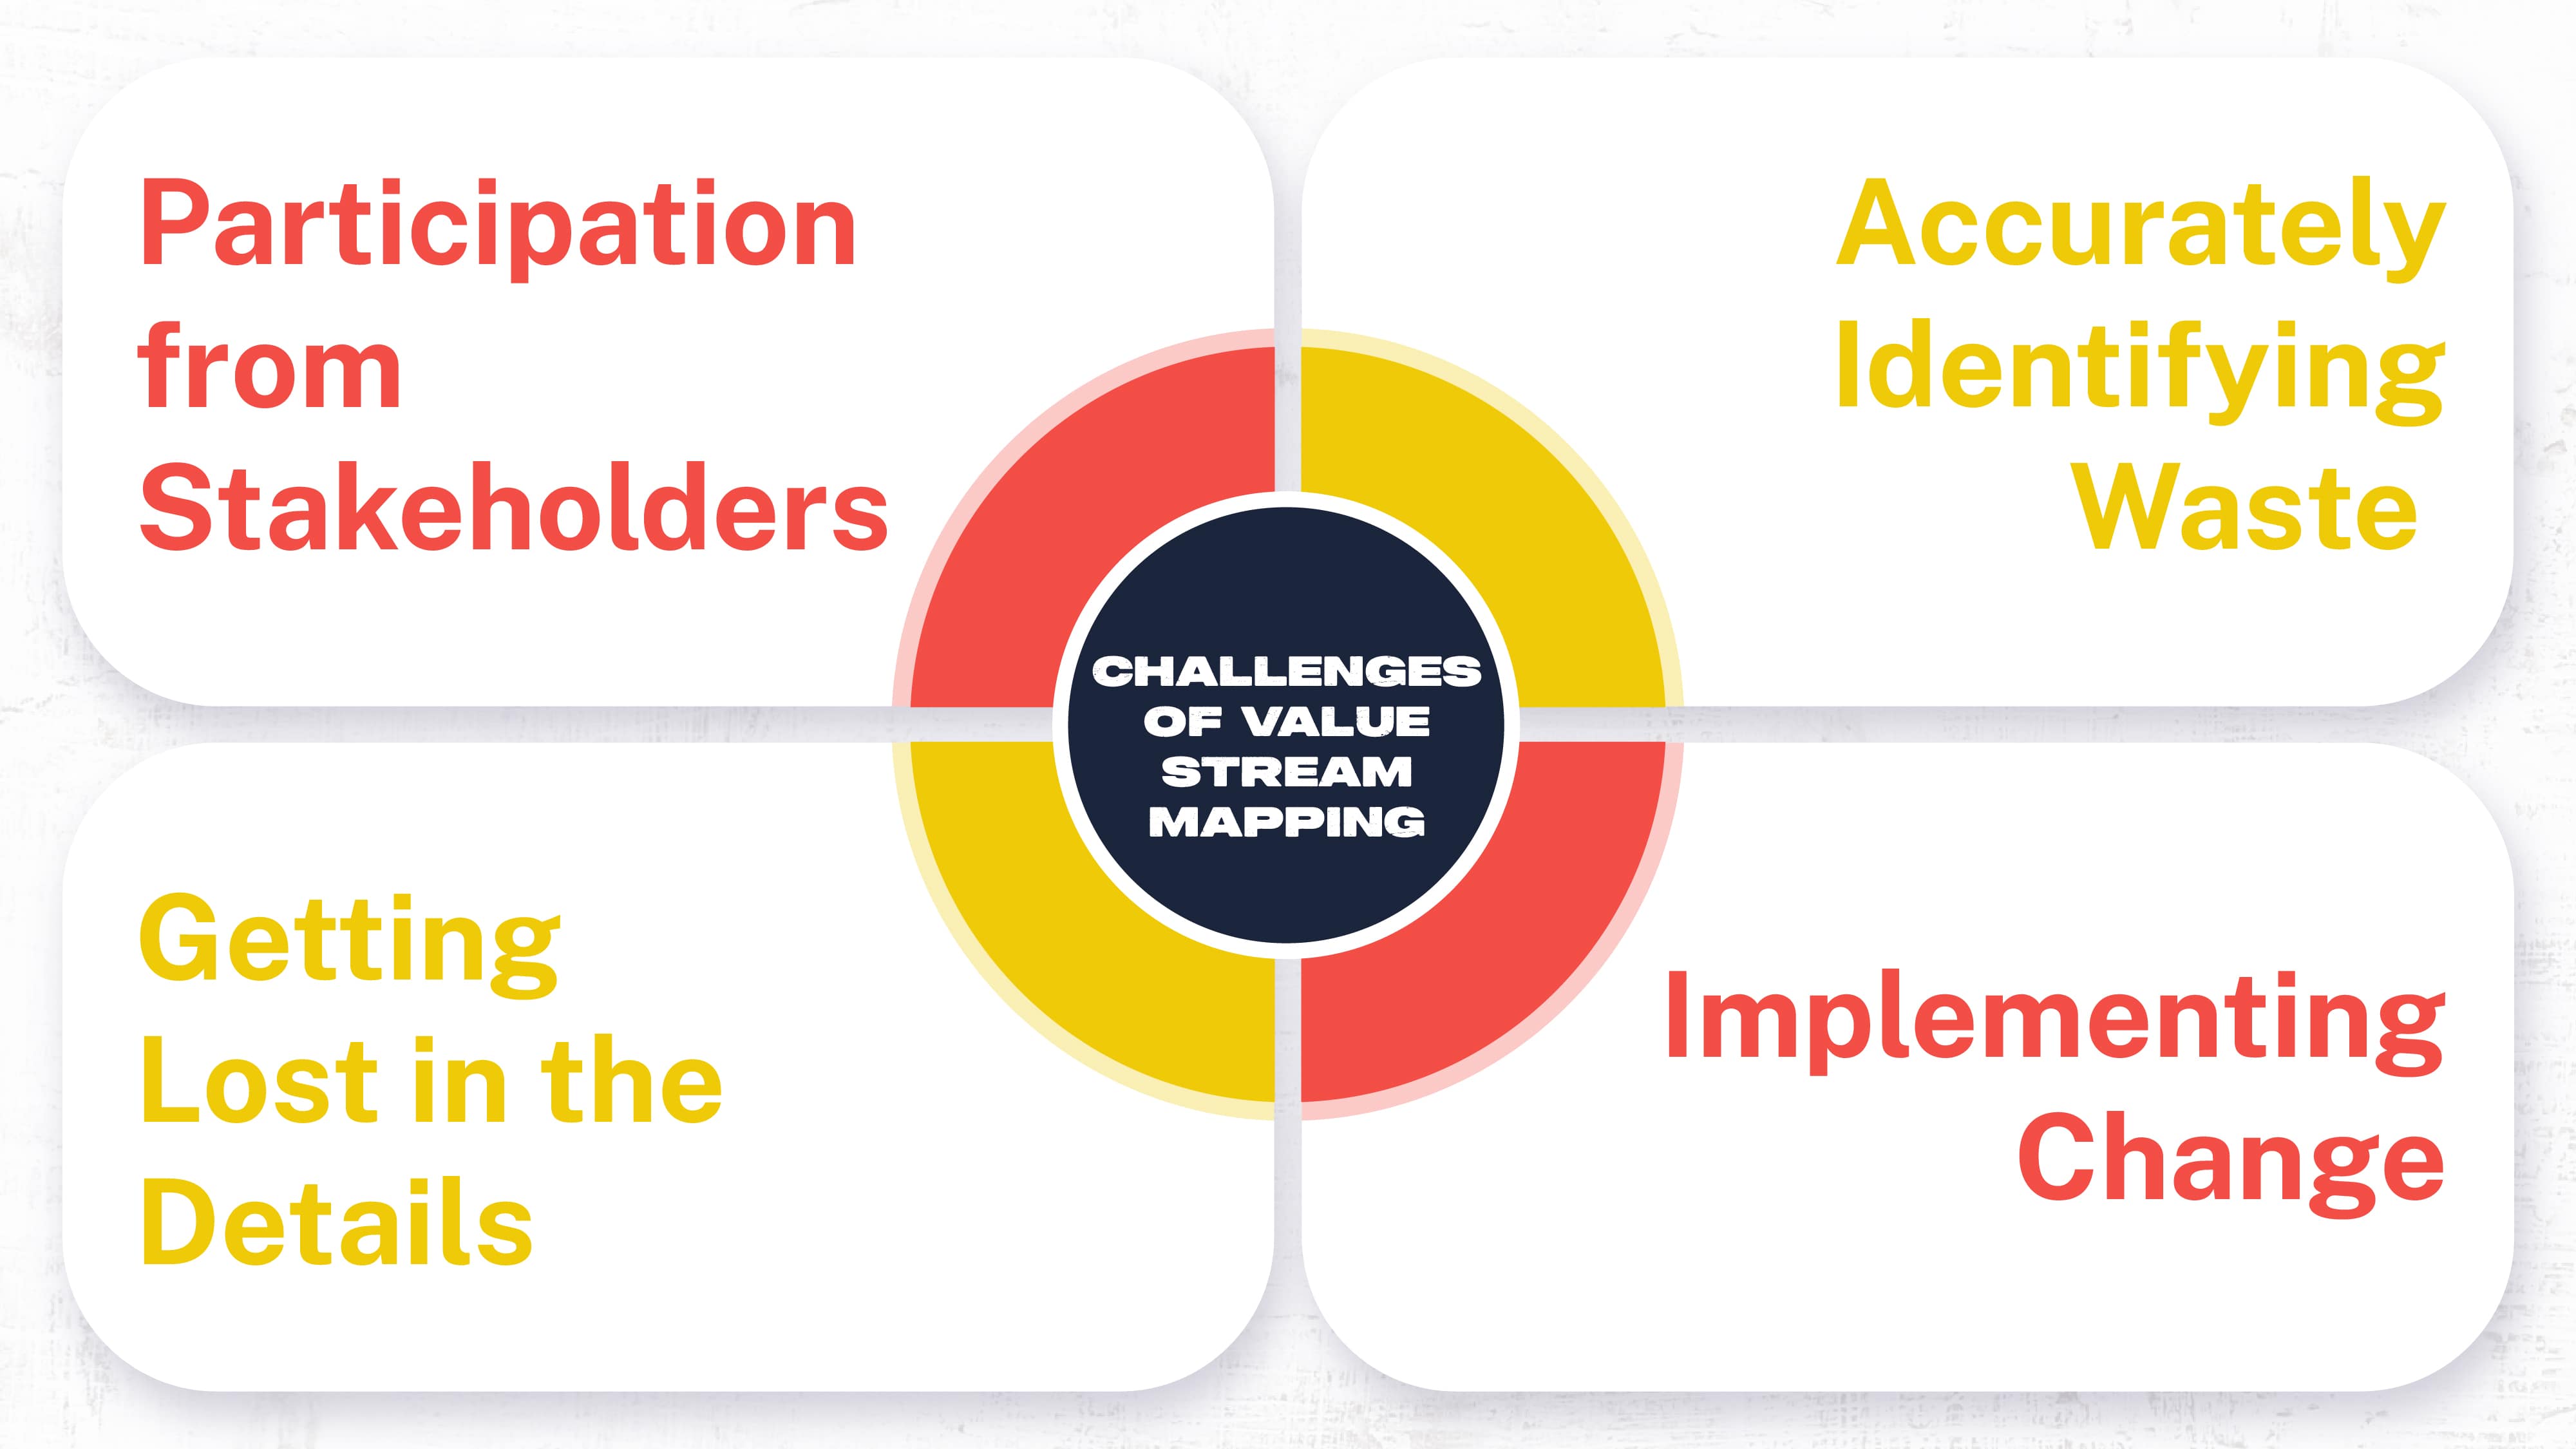 Challenges of Value Stream Mapping